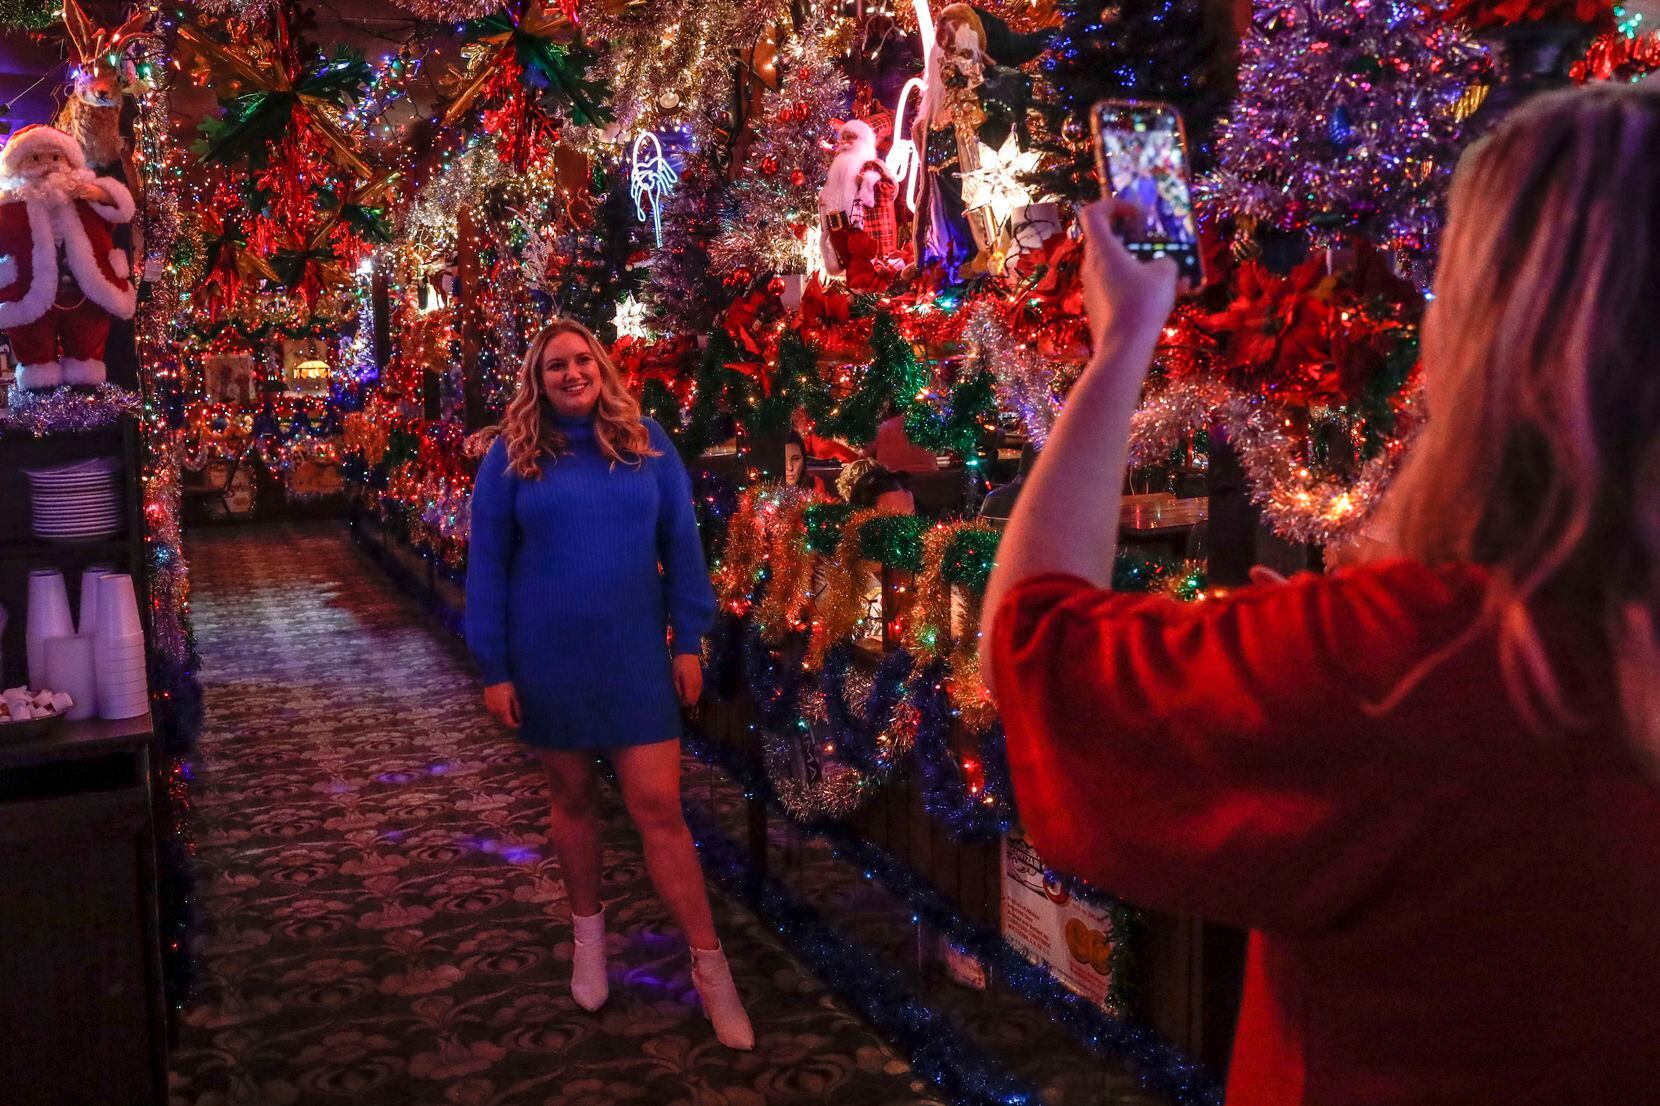 Elizabeth Brown gets her photo taken by her sister, Nicole Brown, among the Christmas decorations inside of Campo Verde in Arlington. When the restaurant opens on Saturdays and Sundays at 11 a.m., 250 people are usually waiting in line at the door during the holiday season.